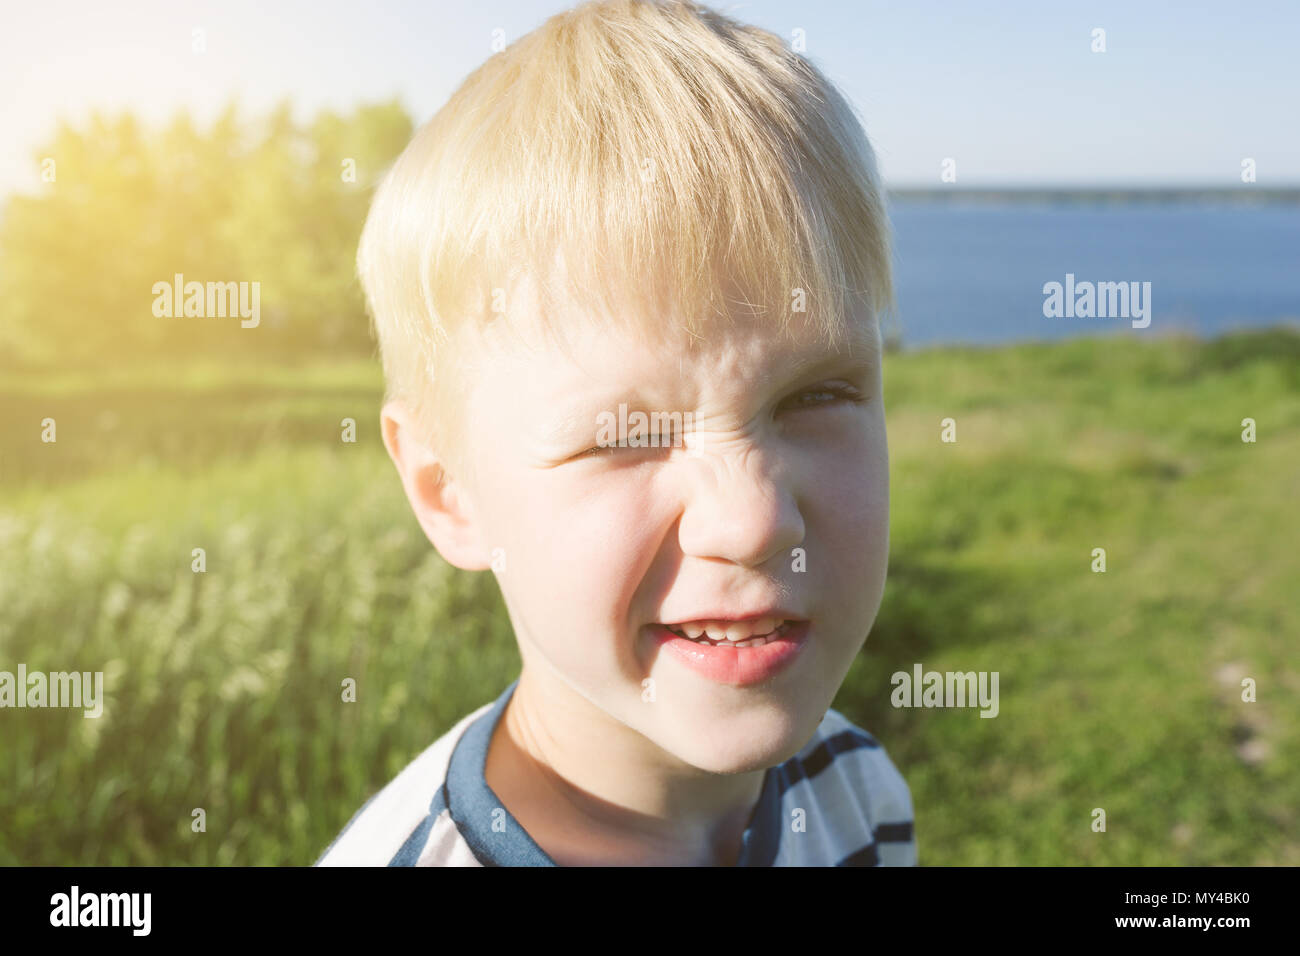 Portrait of blond boy joyful and closing his eye from the sun on nature. Summer activity. Stock Photo